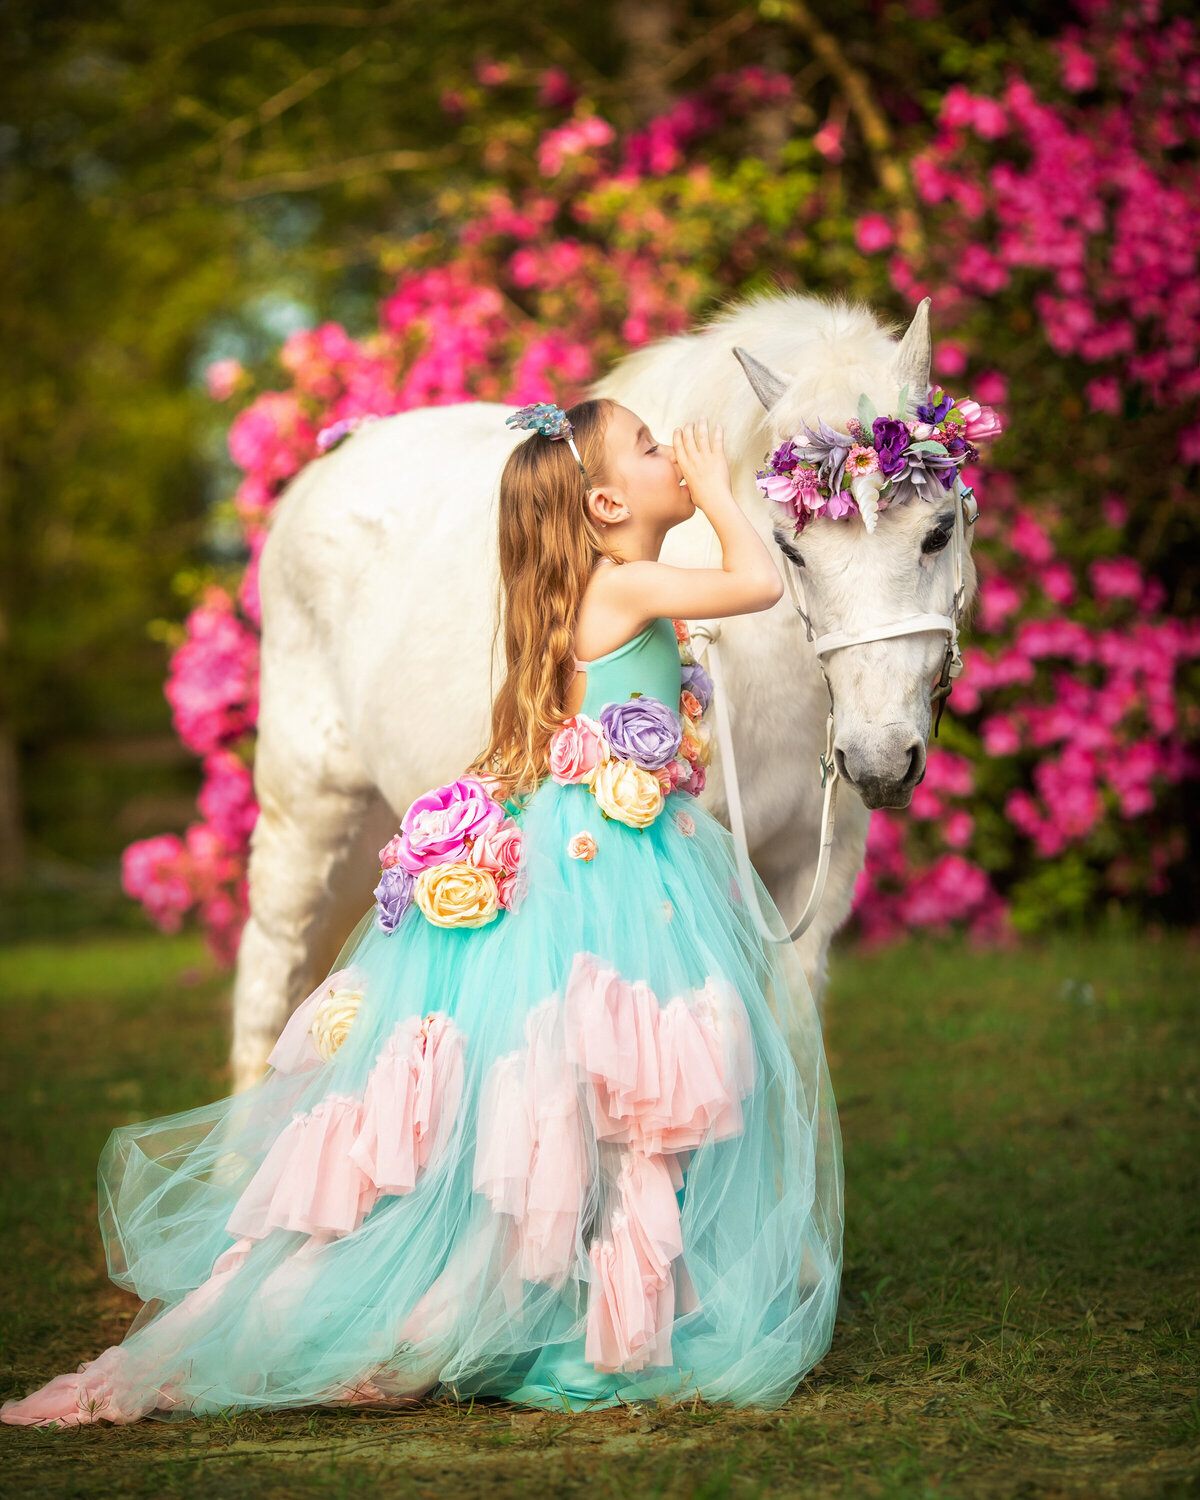 Welsh pony with a white unicorn horn and pink and purple flowers on her bridle.  The horse is white.  There is a young girl with long dark blonde hair.  She is wearing an aqua and pink dress with roses on it.  She is wispering into the unicorn's ear.  There are pink azaleals blooming in the background.